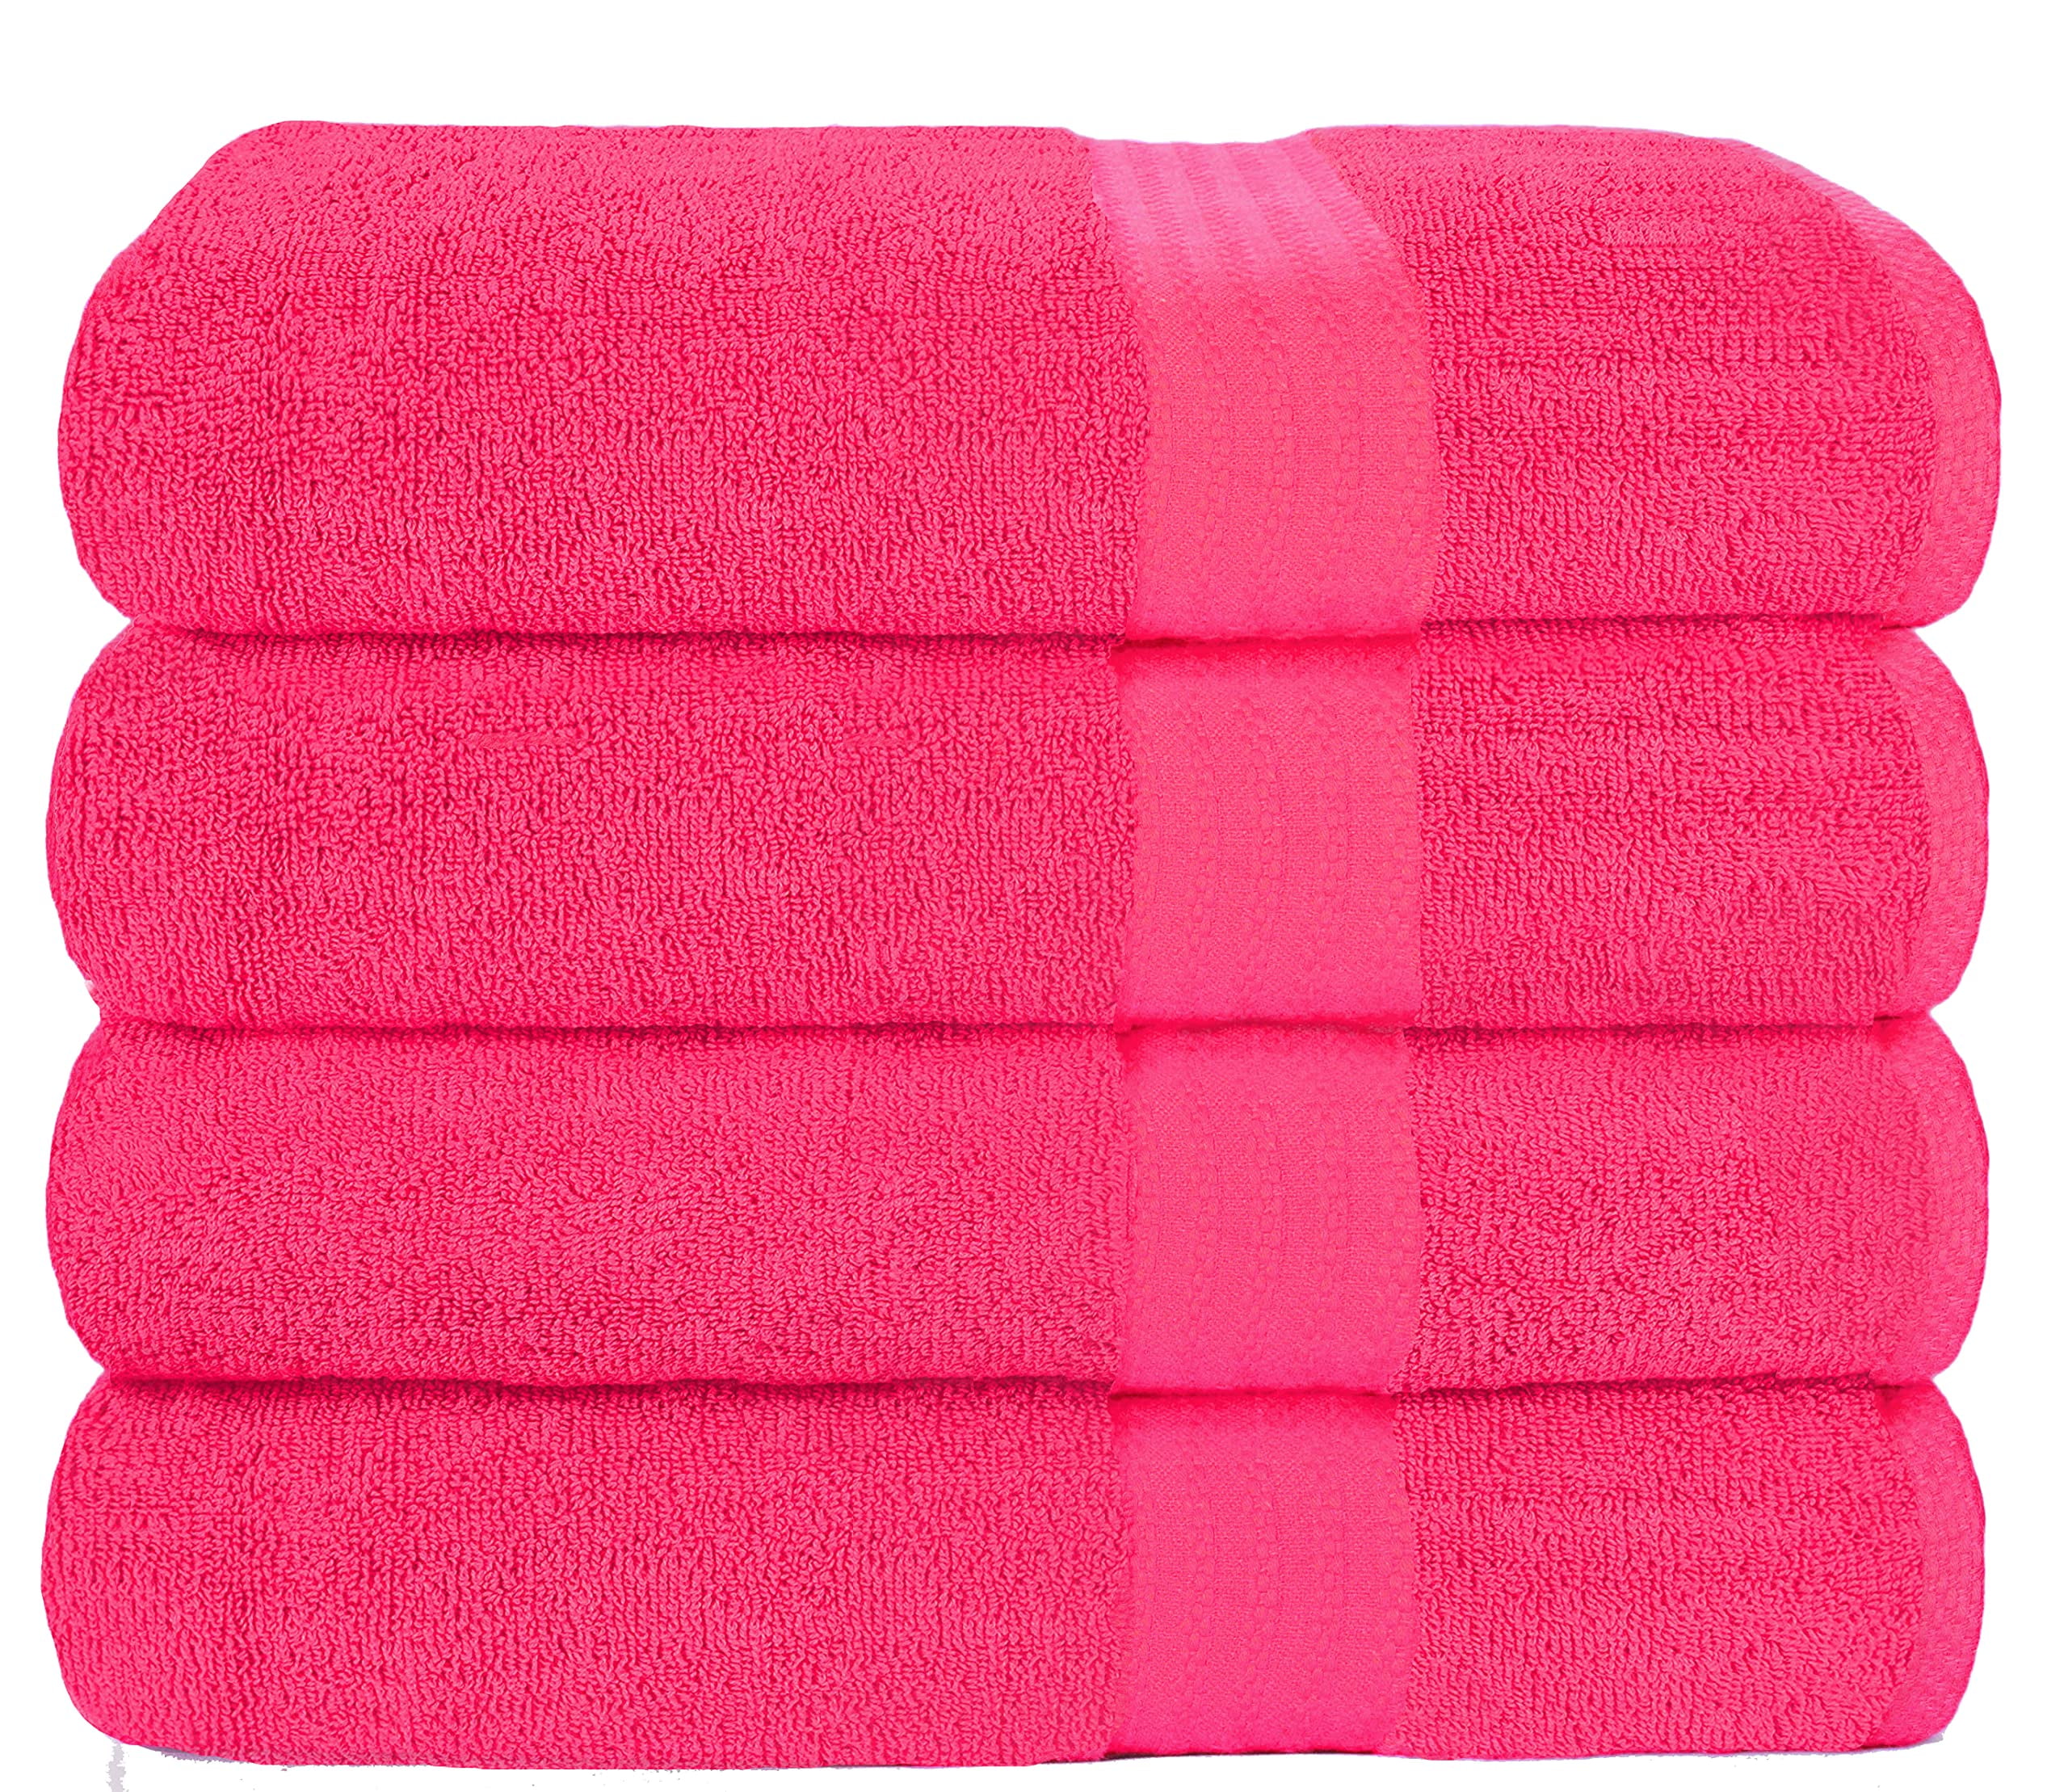 Benaep Bath Towels Premium Bath Towel Set,4-Piece Large 28″x55″ Towel Set,100%  Combed Cotton Ultra Soft Absorbent Quick Drying Towels for Bathroom,Gym,Pool,  Hotel, and Spa - Coupon Codes, Promo Codes, Daily Deals, Save